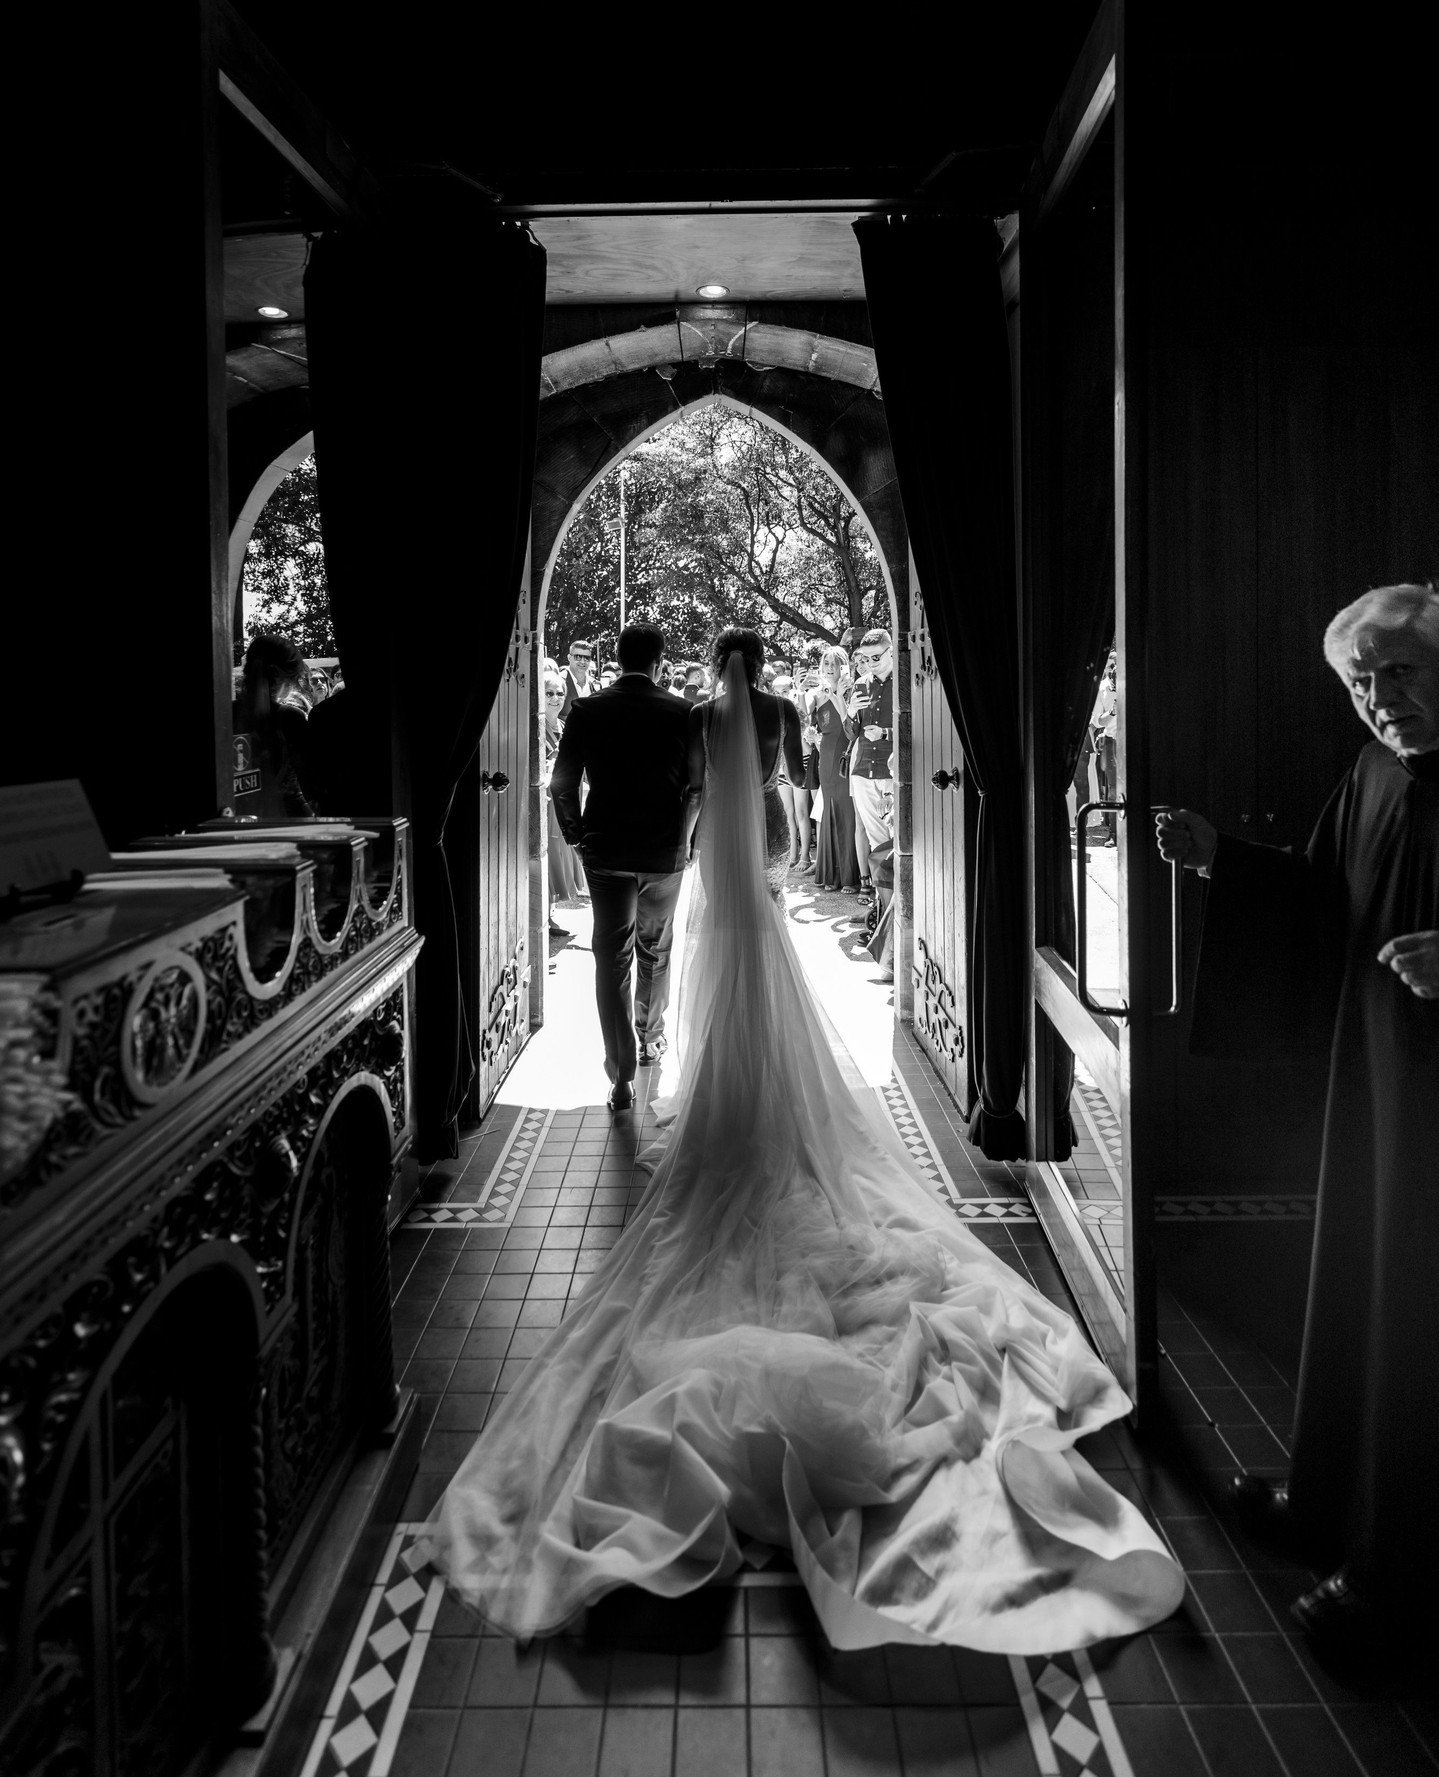 Top &quot;Not Posed&quot; Photos - Part 1⁠
⁠
Leaving and entering your church. ⁠
⁠
Especially in black and white, when the dark background of your church creates a contrasting background for the white of your dress, often highlighting the train and/o